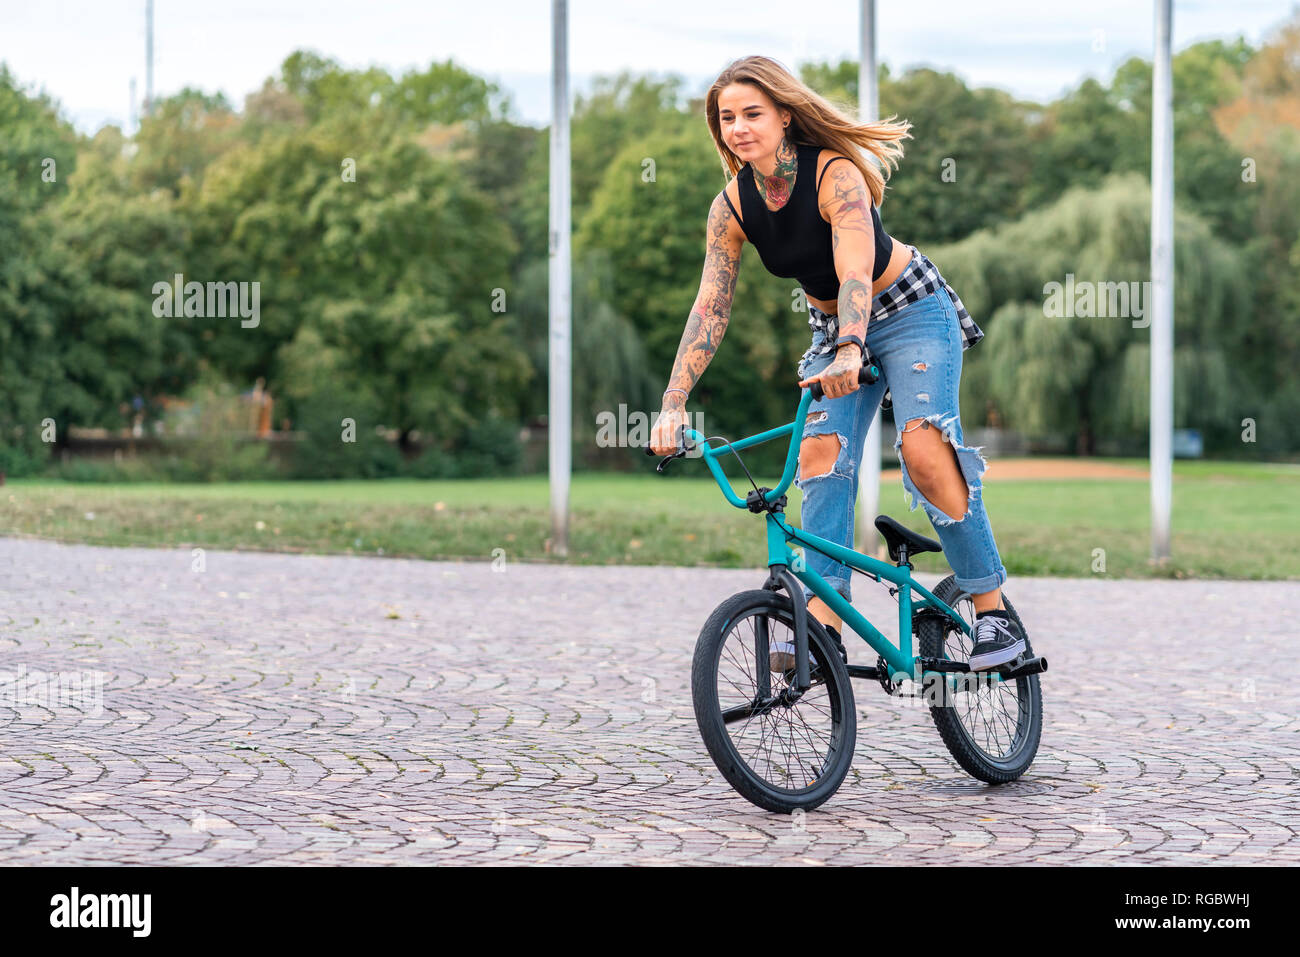 Bmx Bike High Resolution Stock Photography And Images Alamy